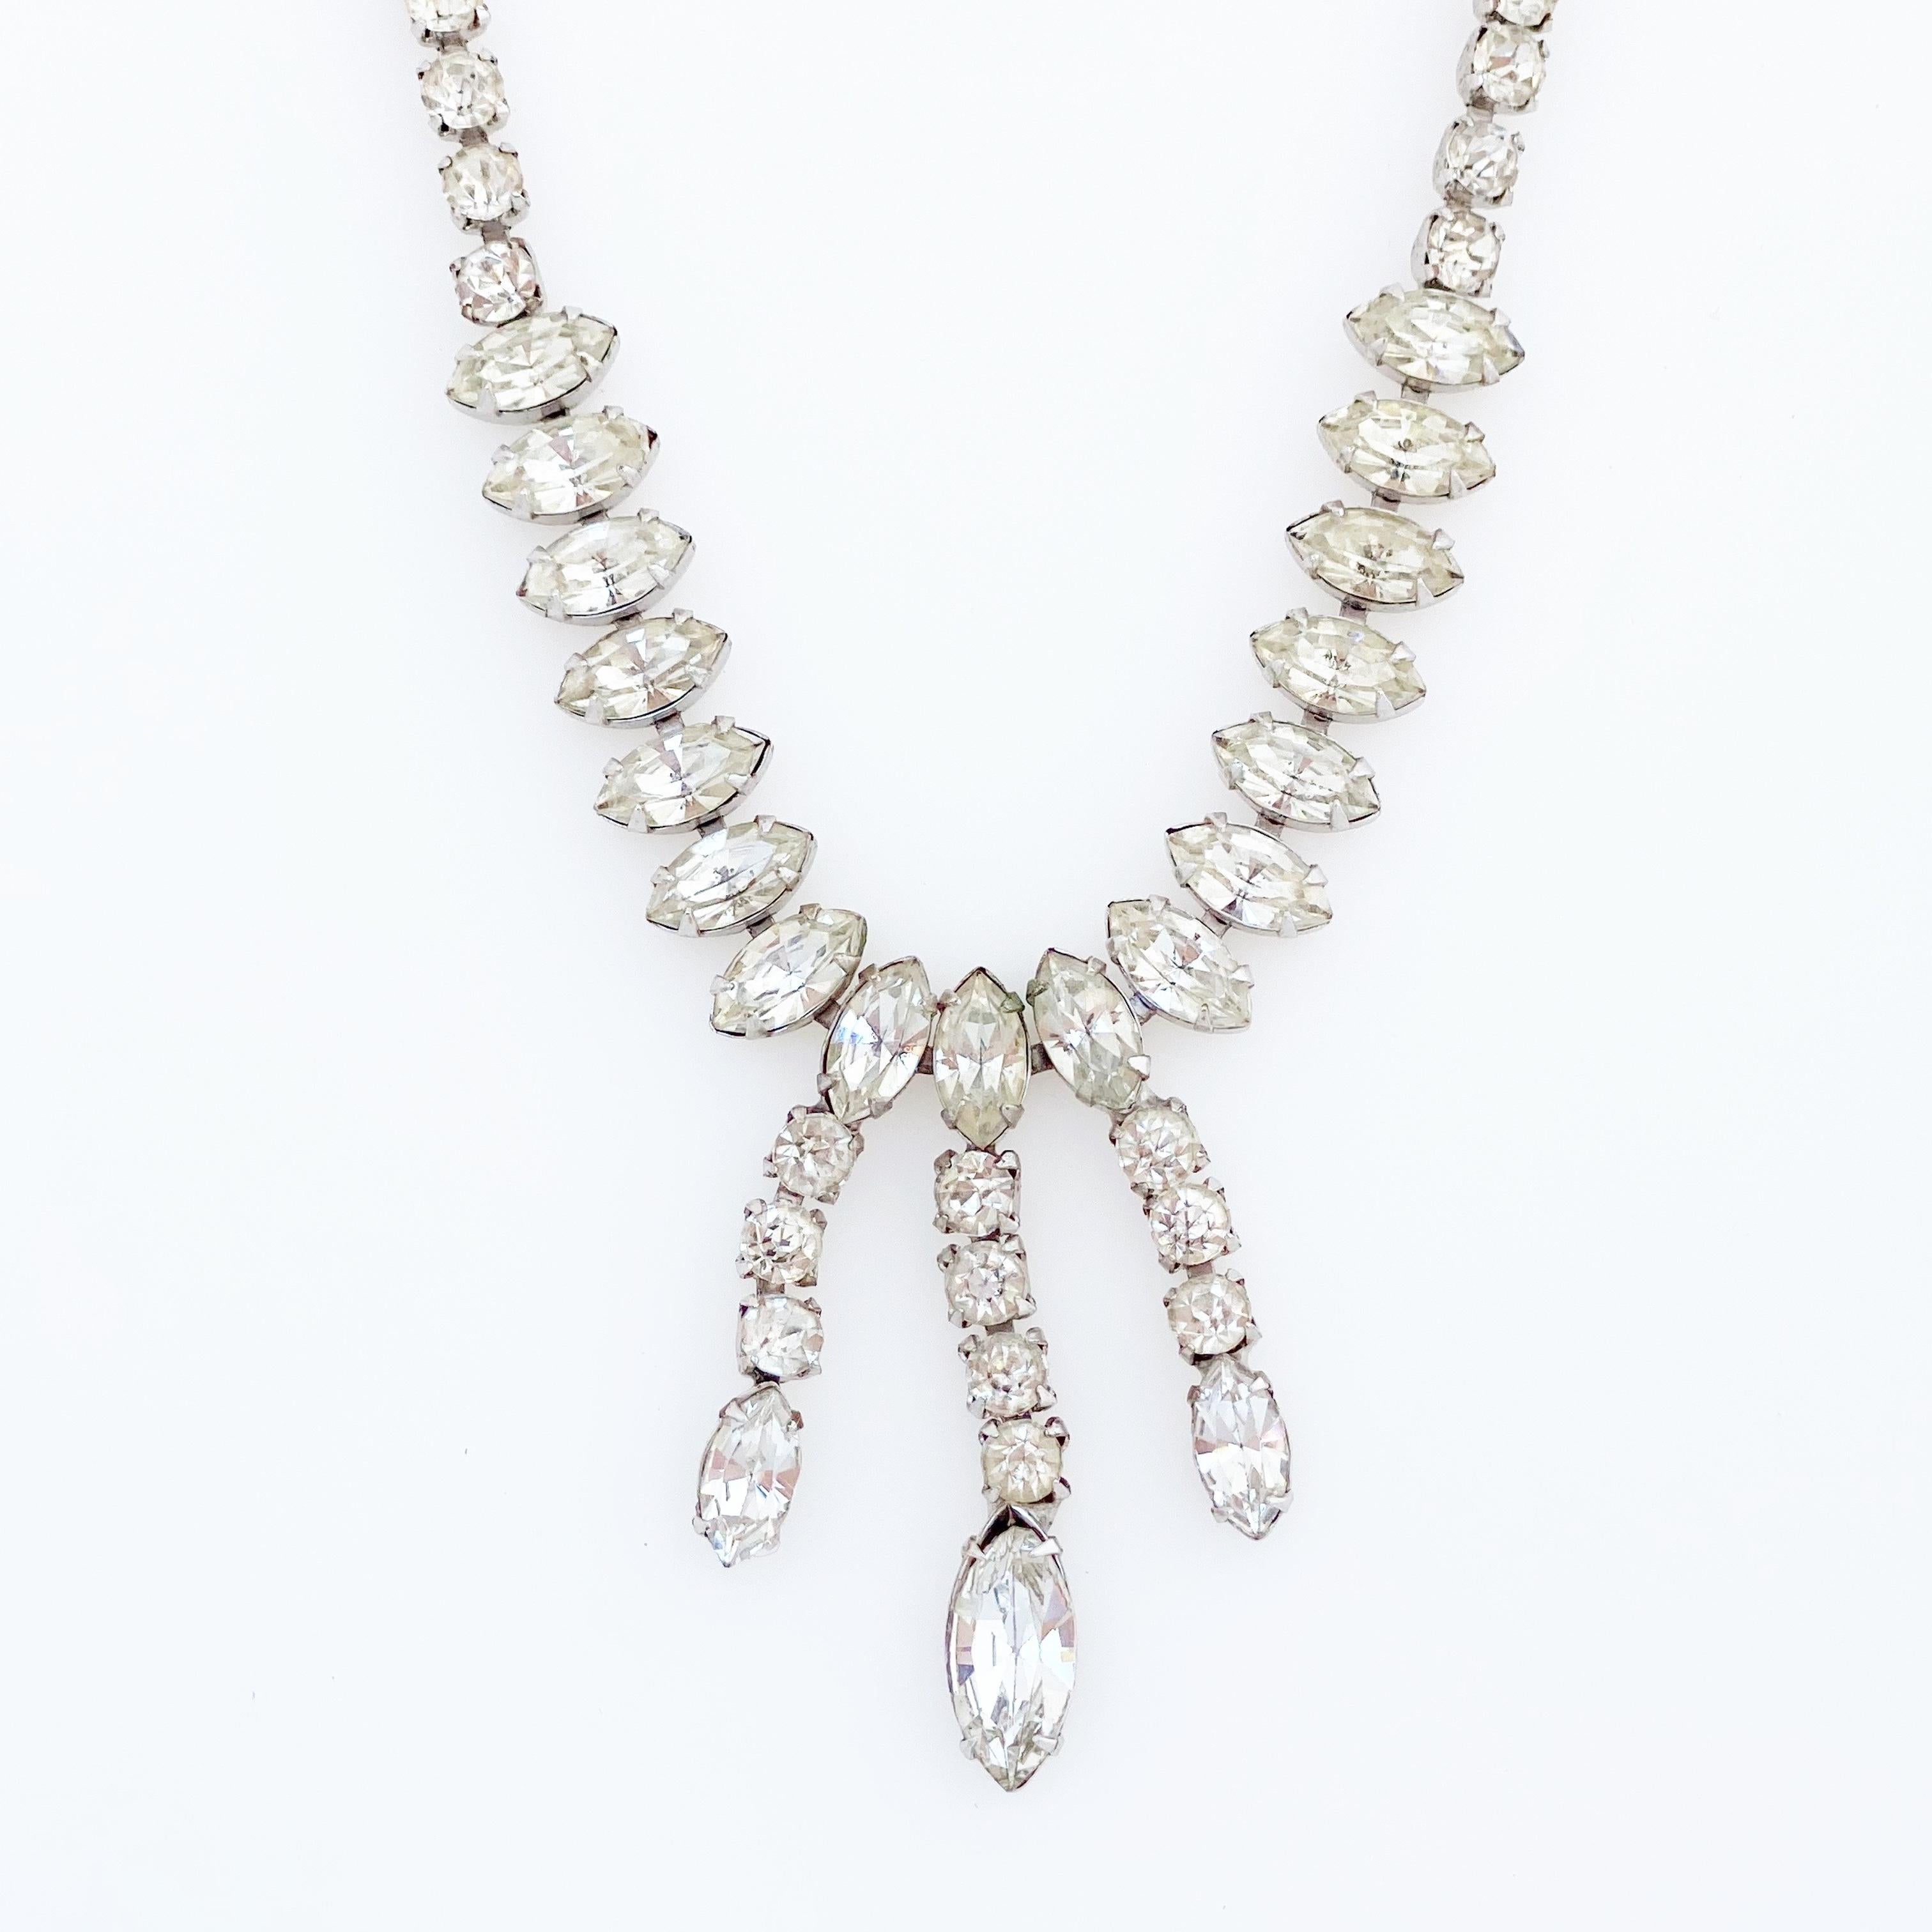 Modern Cocktail Crystal Choker Necklace with Navette Dangles, 1950s